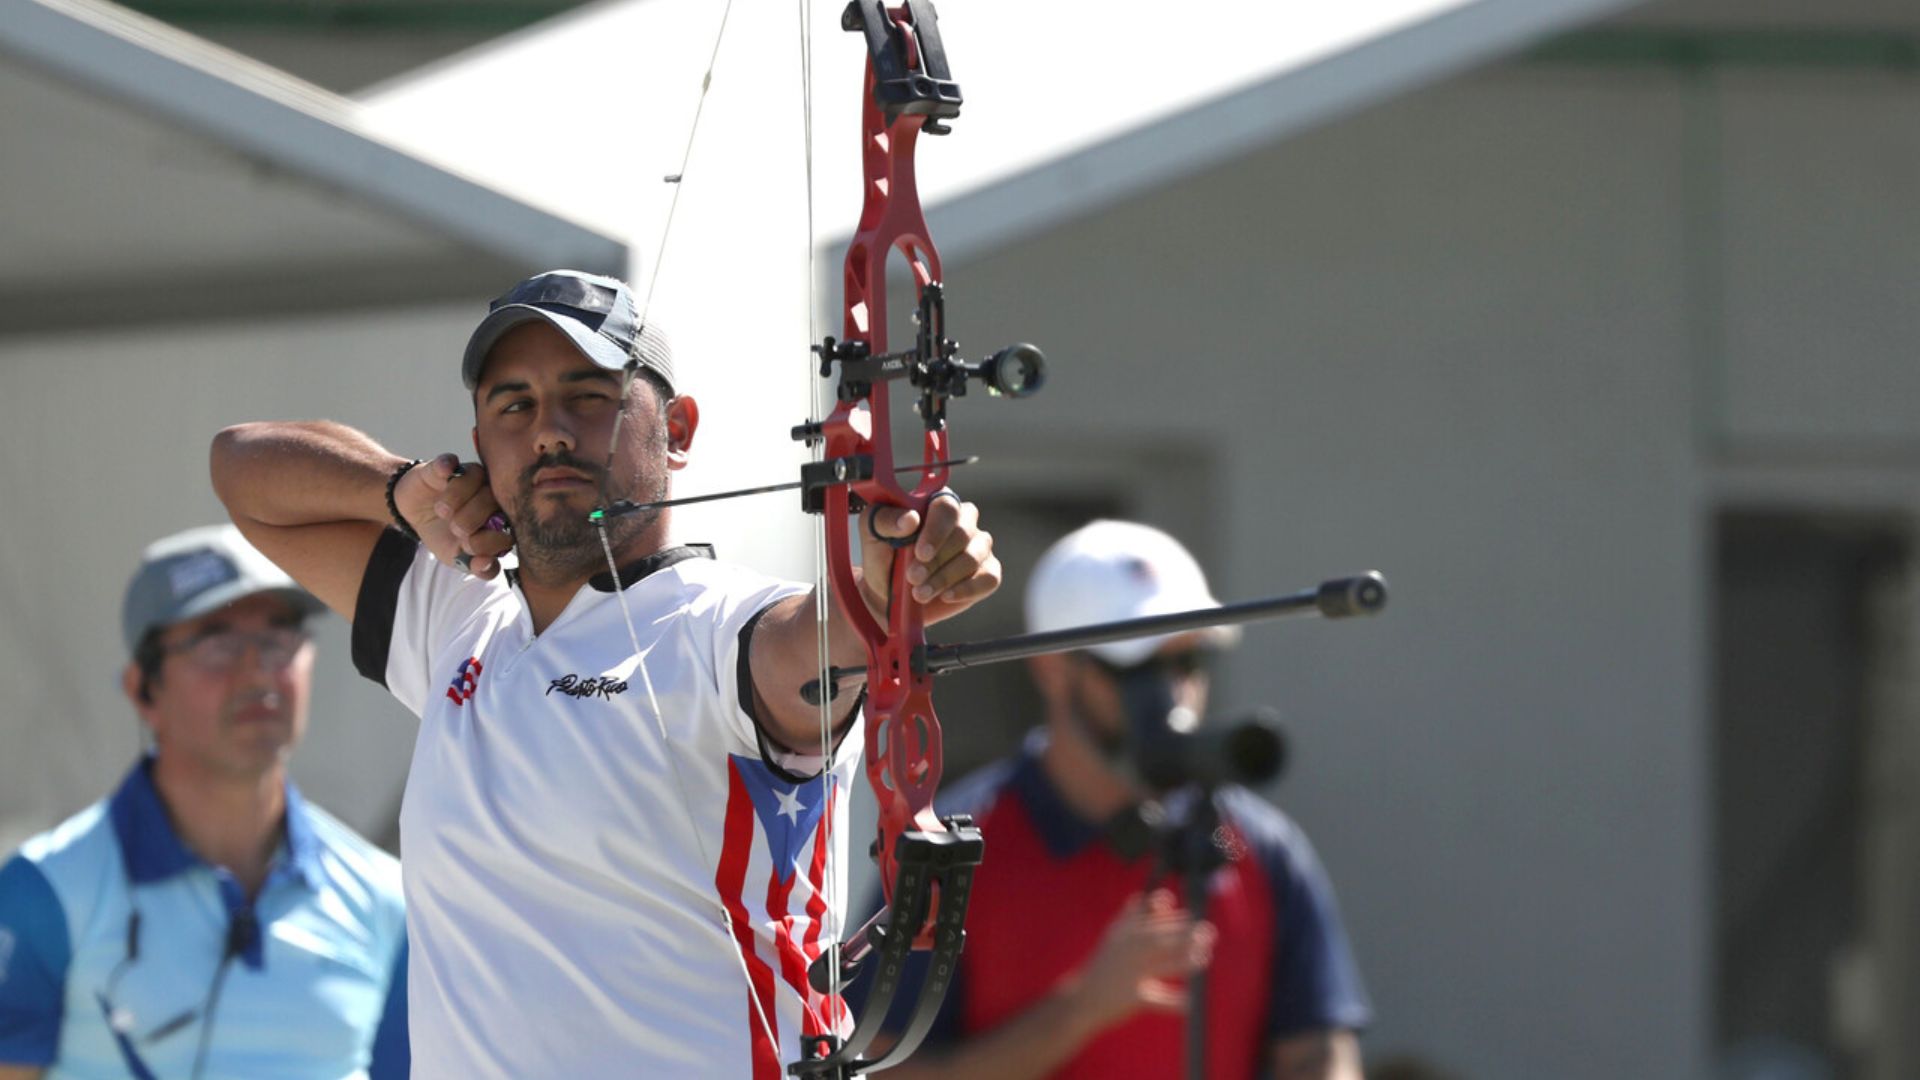 Mexico and Puerto Rico win gold in archery